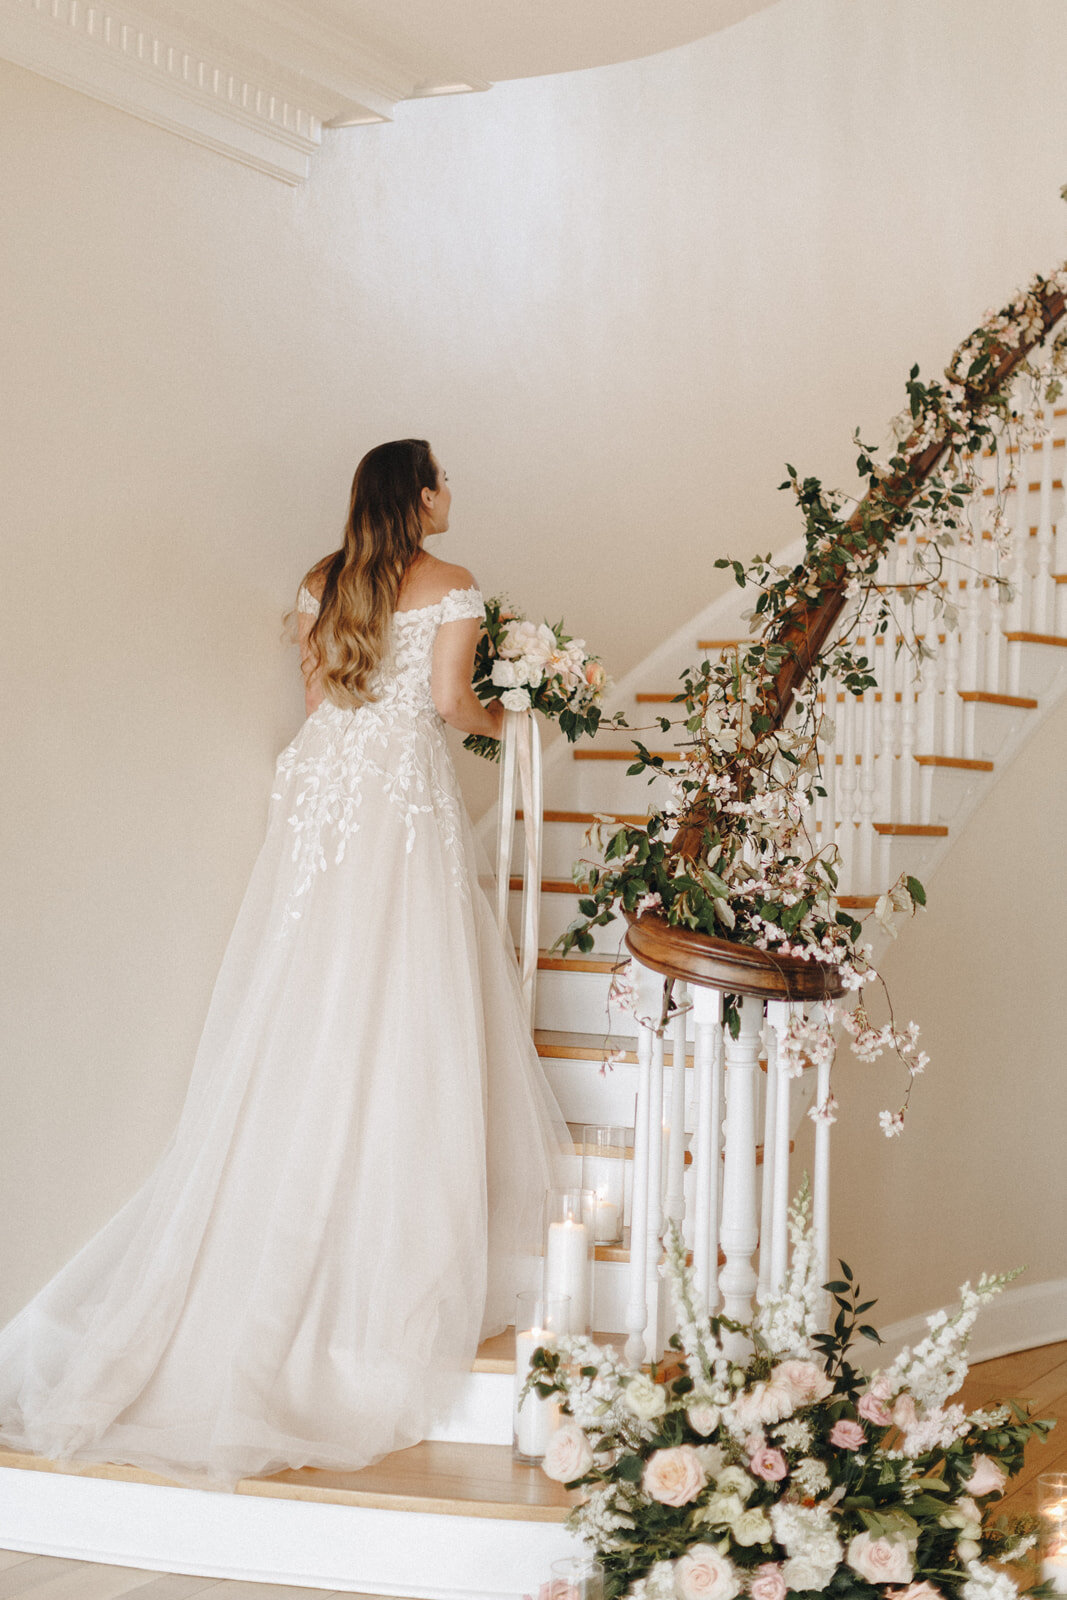 Bridal Portrait on Staircase with Garden Style Greens going up the stairs and a romantic candle set (Copy) (Copy)